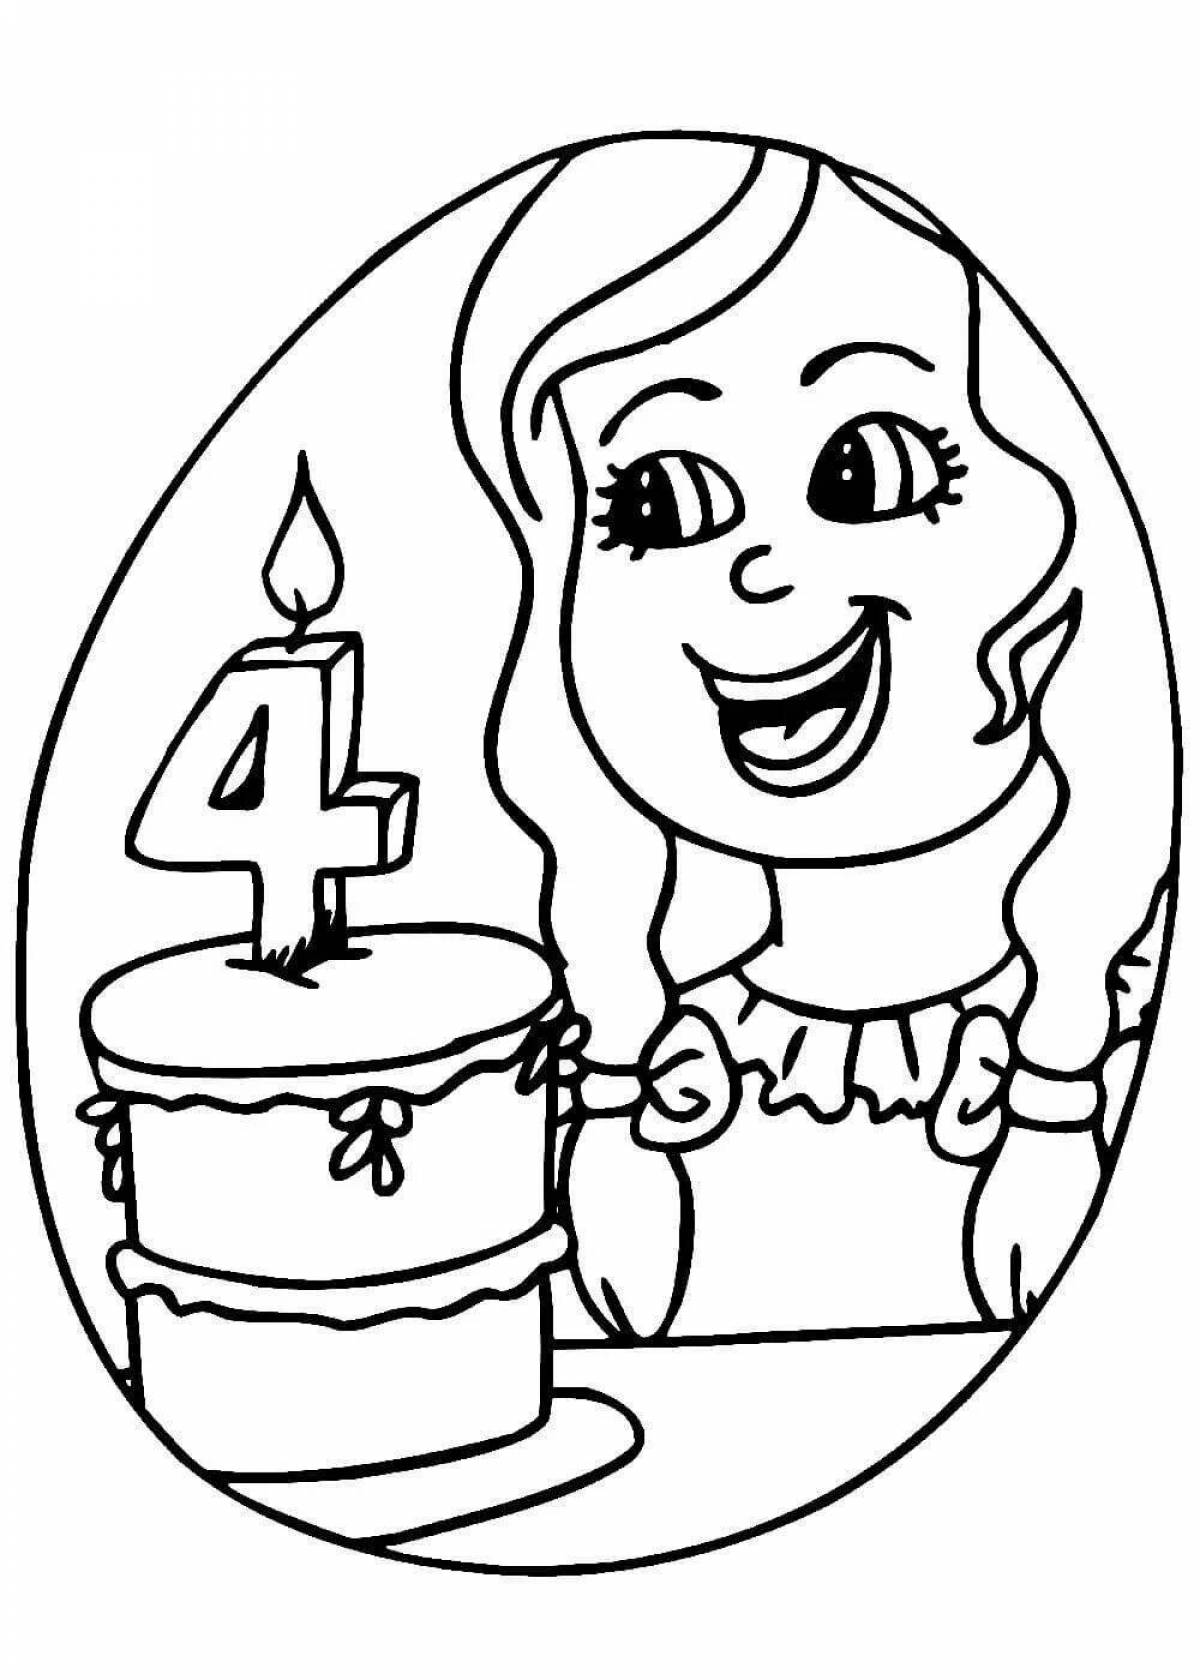 Coloring page lovely little sister for birthday